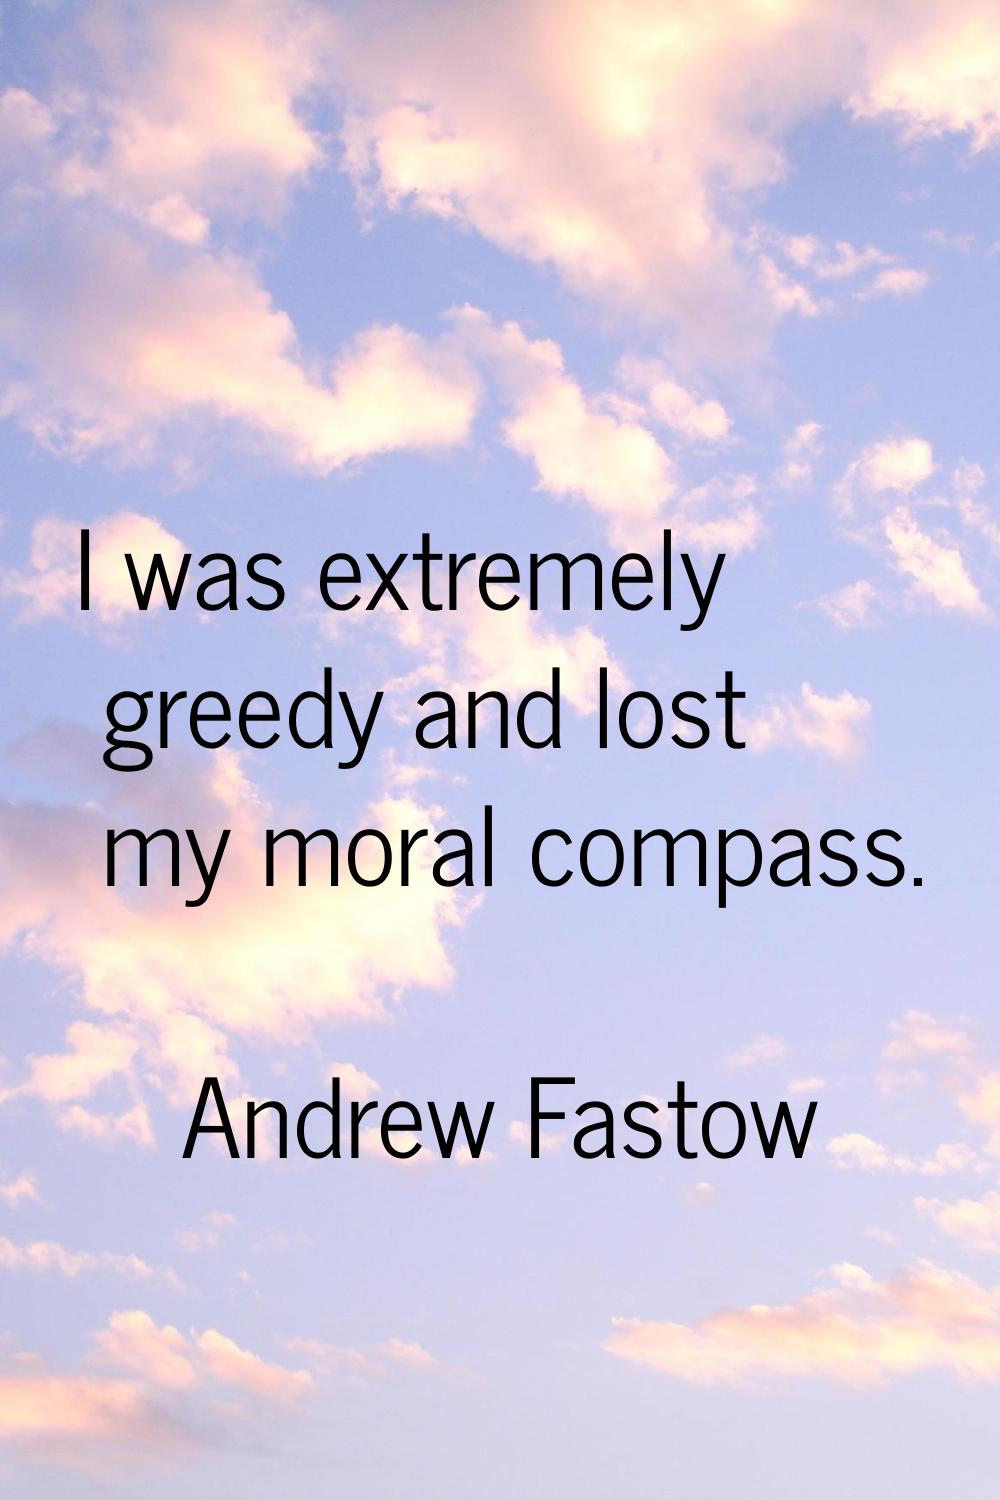 I was extremely greedy and lost my moral compass.